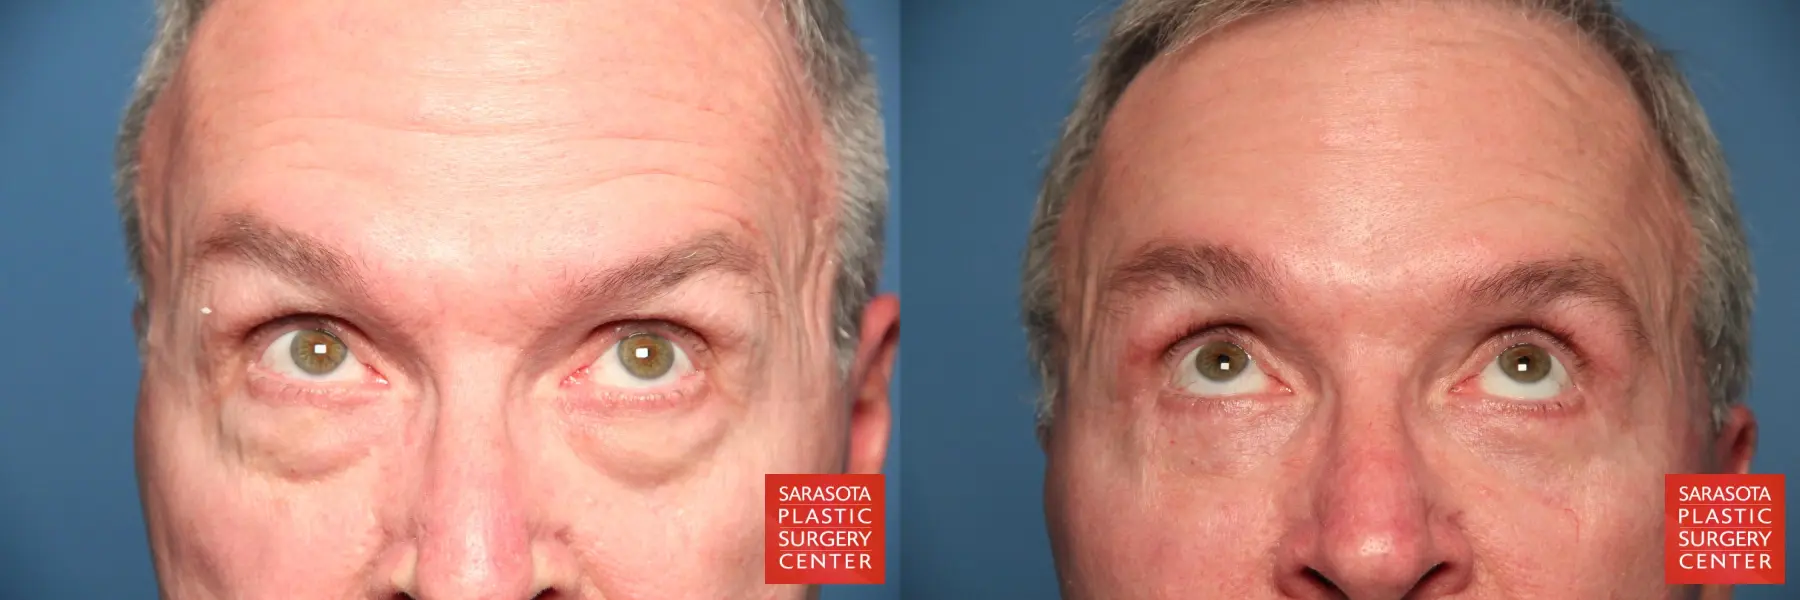 Eyelid Lift For Men Revision: Patient 1 - Before and After 2